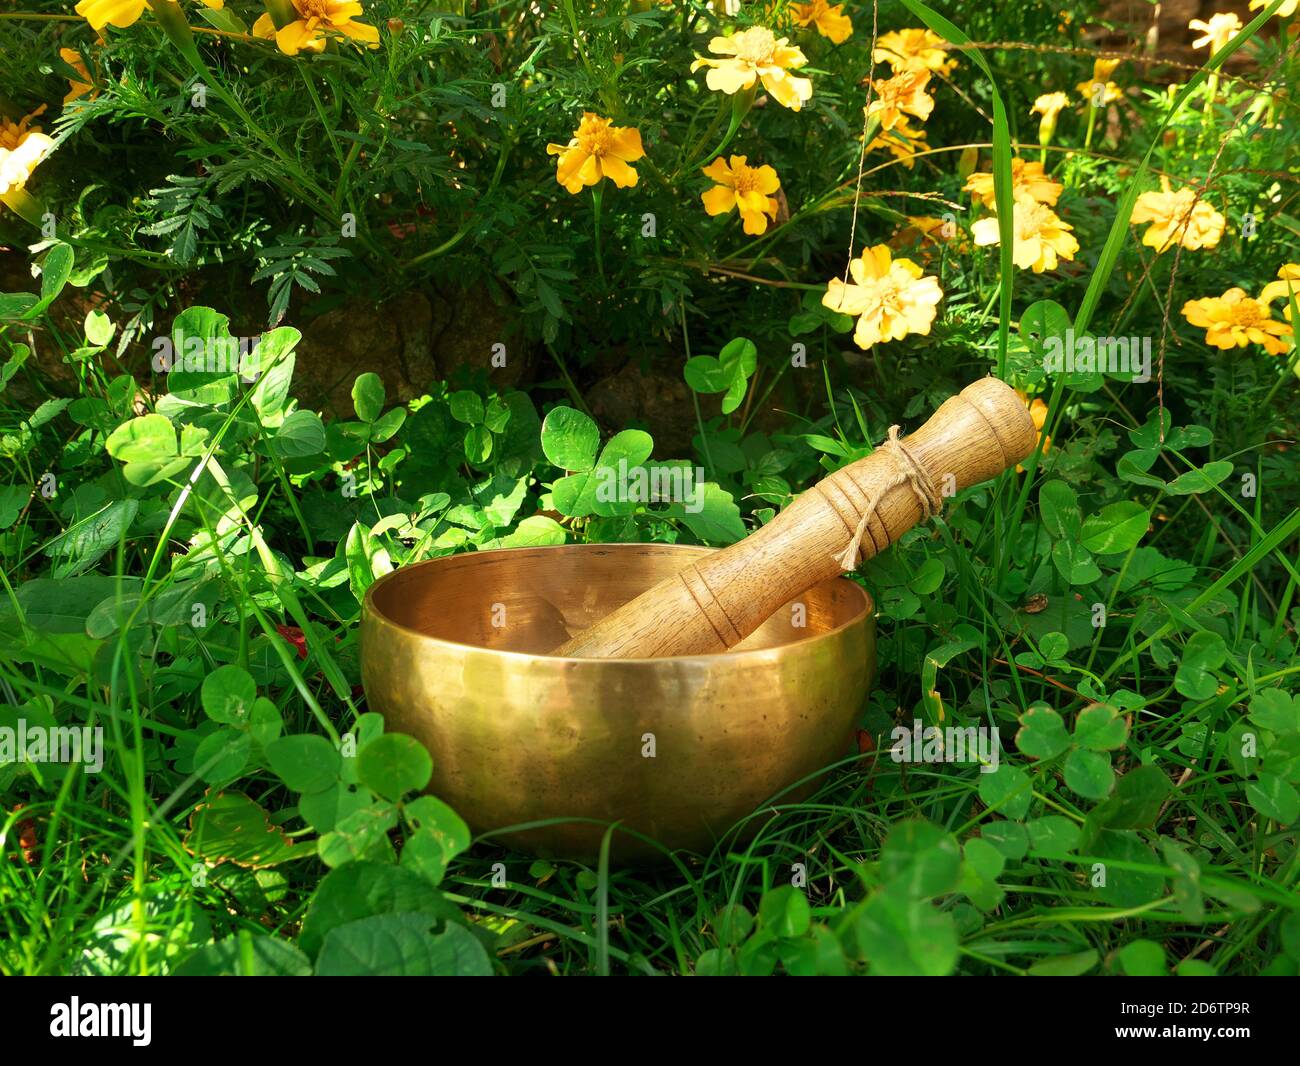 Singing bowl placed in the grass with yellow flowers in background Stock Photo